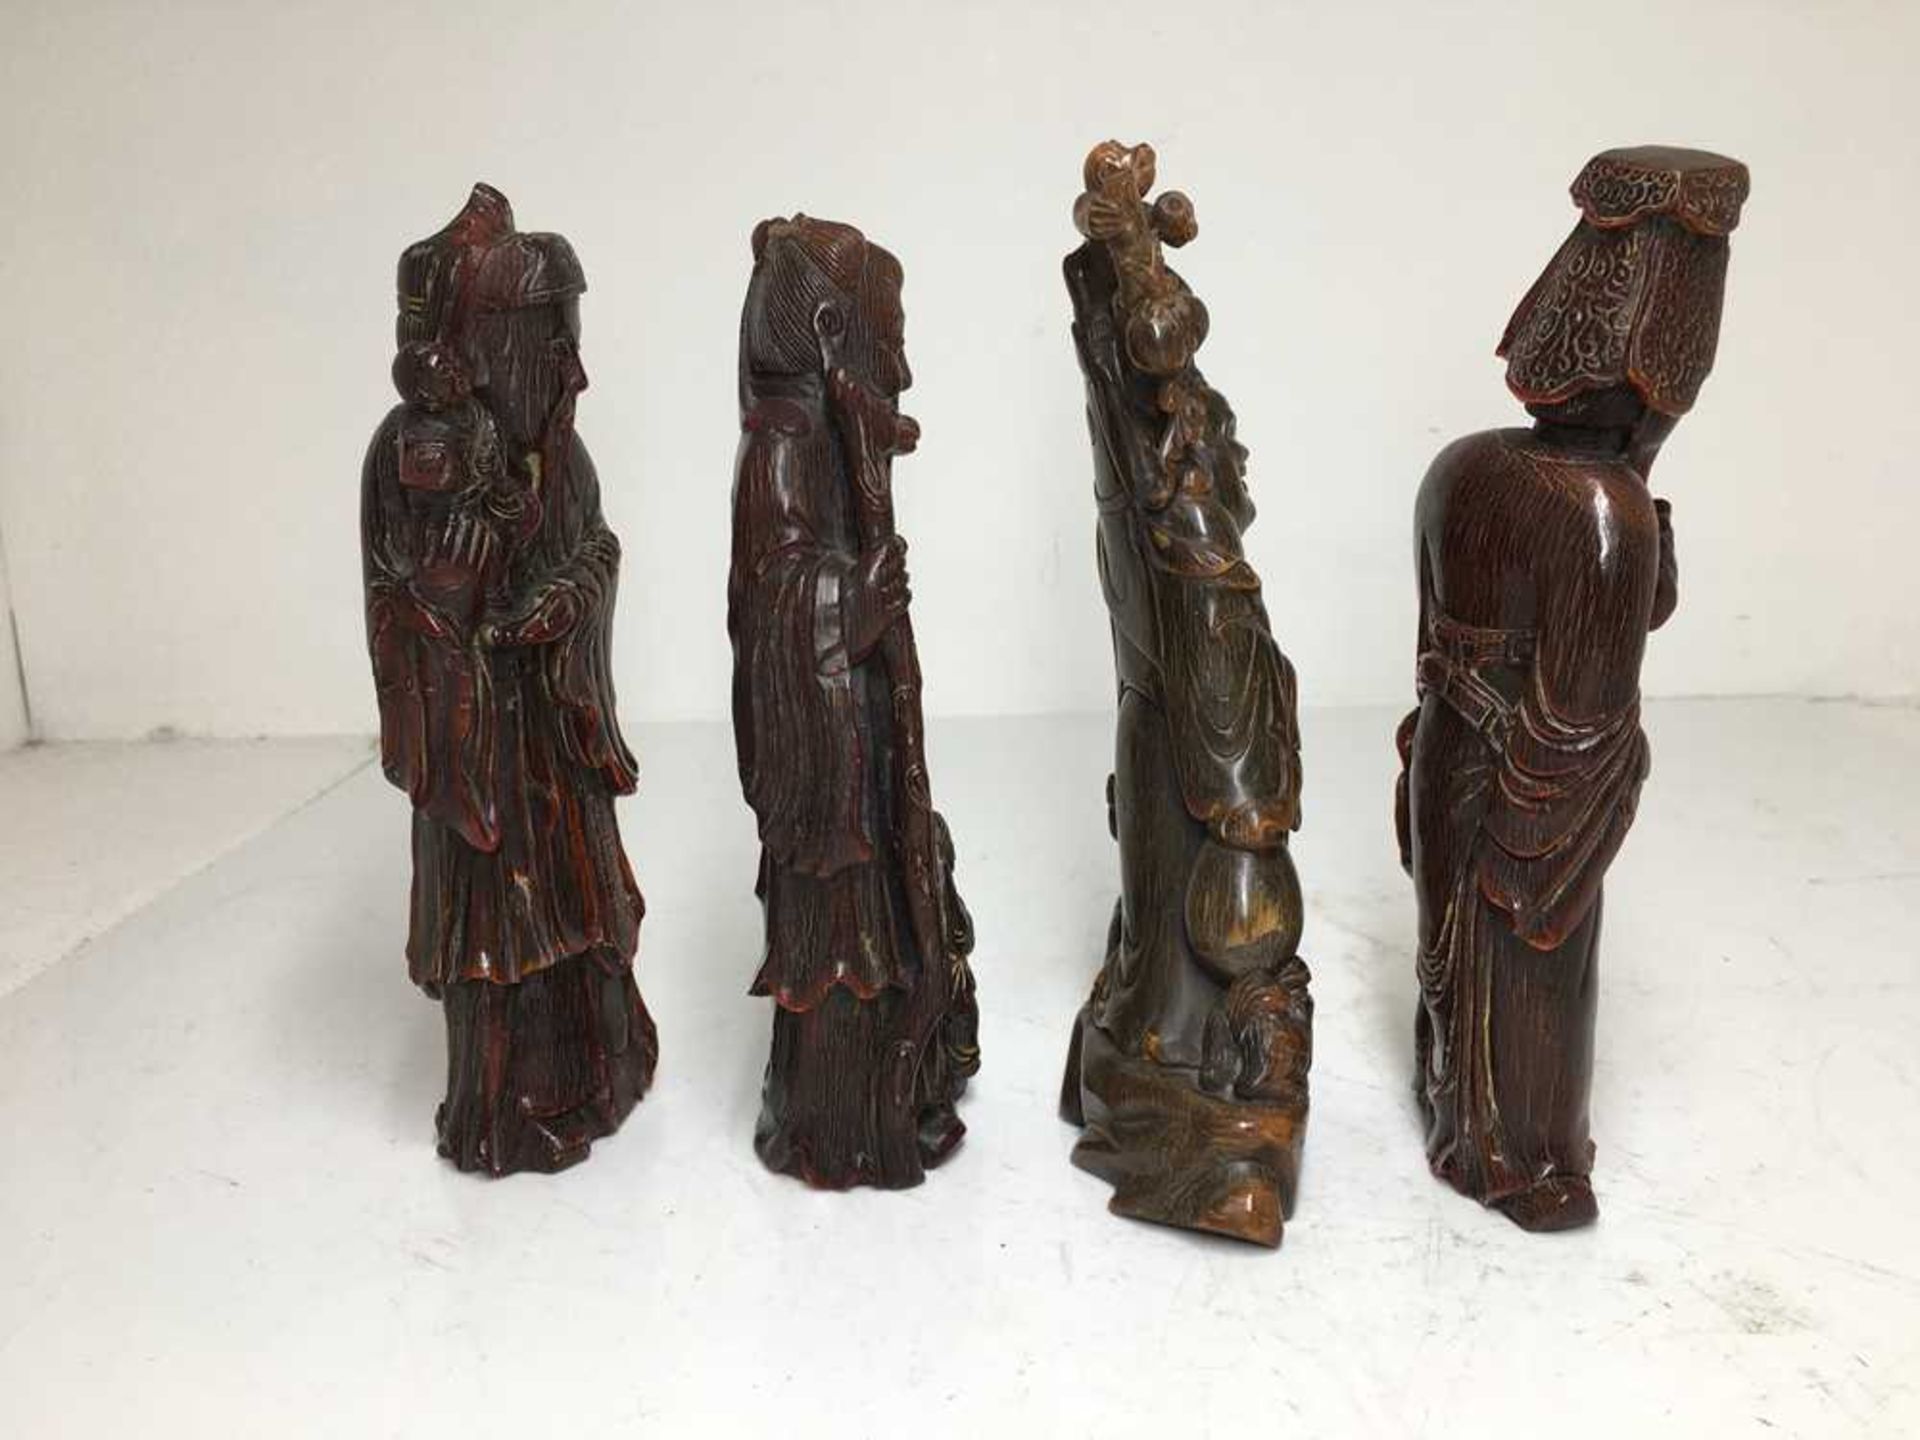 GROUP OF SIX CARVED BUFFALO HORN FIGURES 19TH-20TH CENTURY - Image 14 of 26